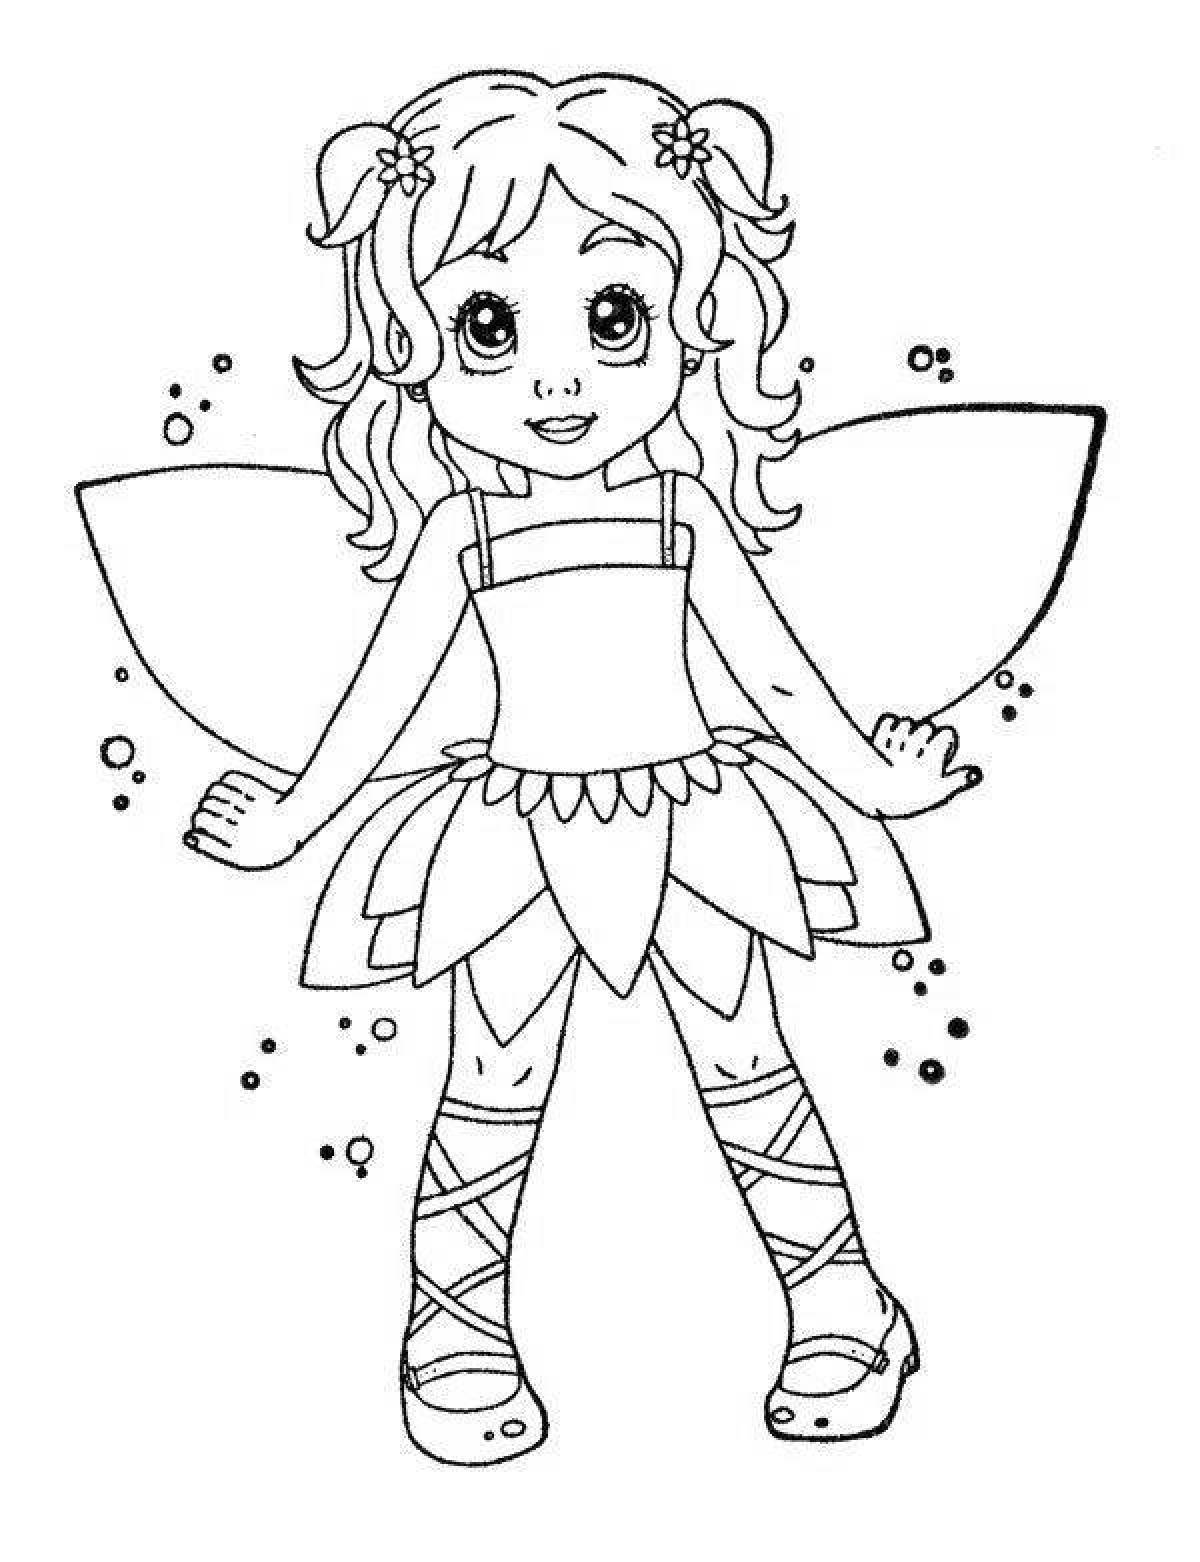 Coloring book shining little fairy